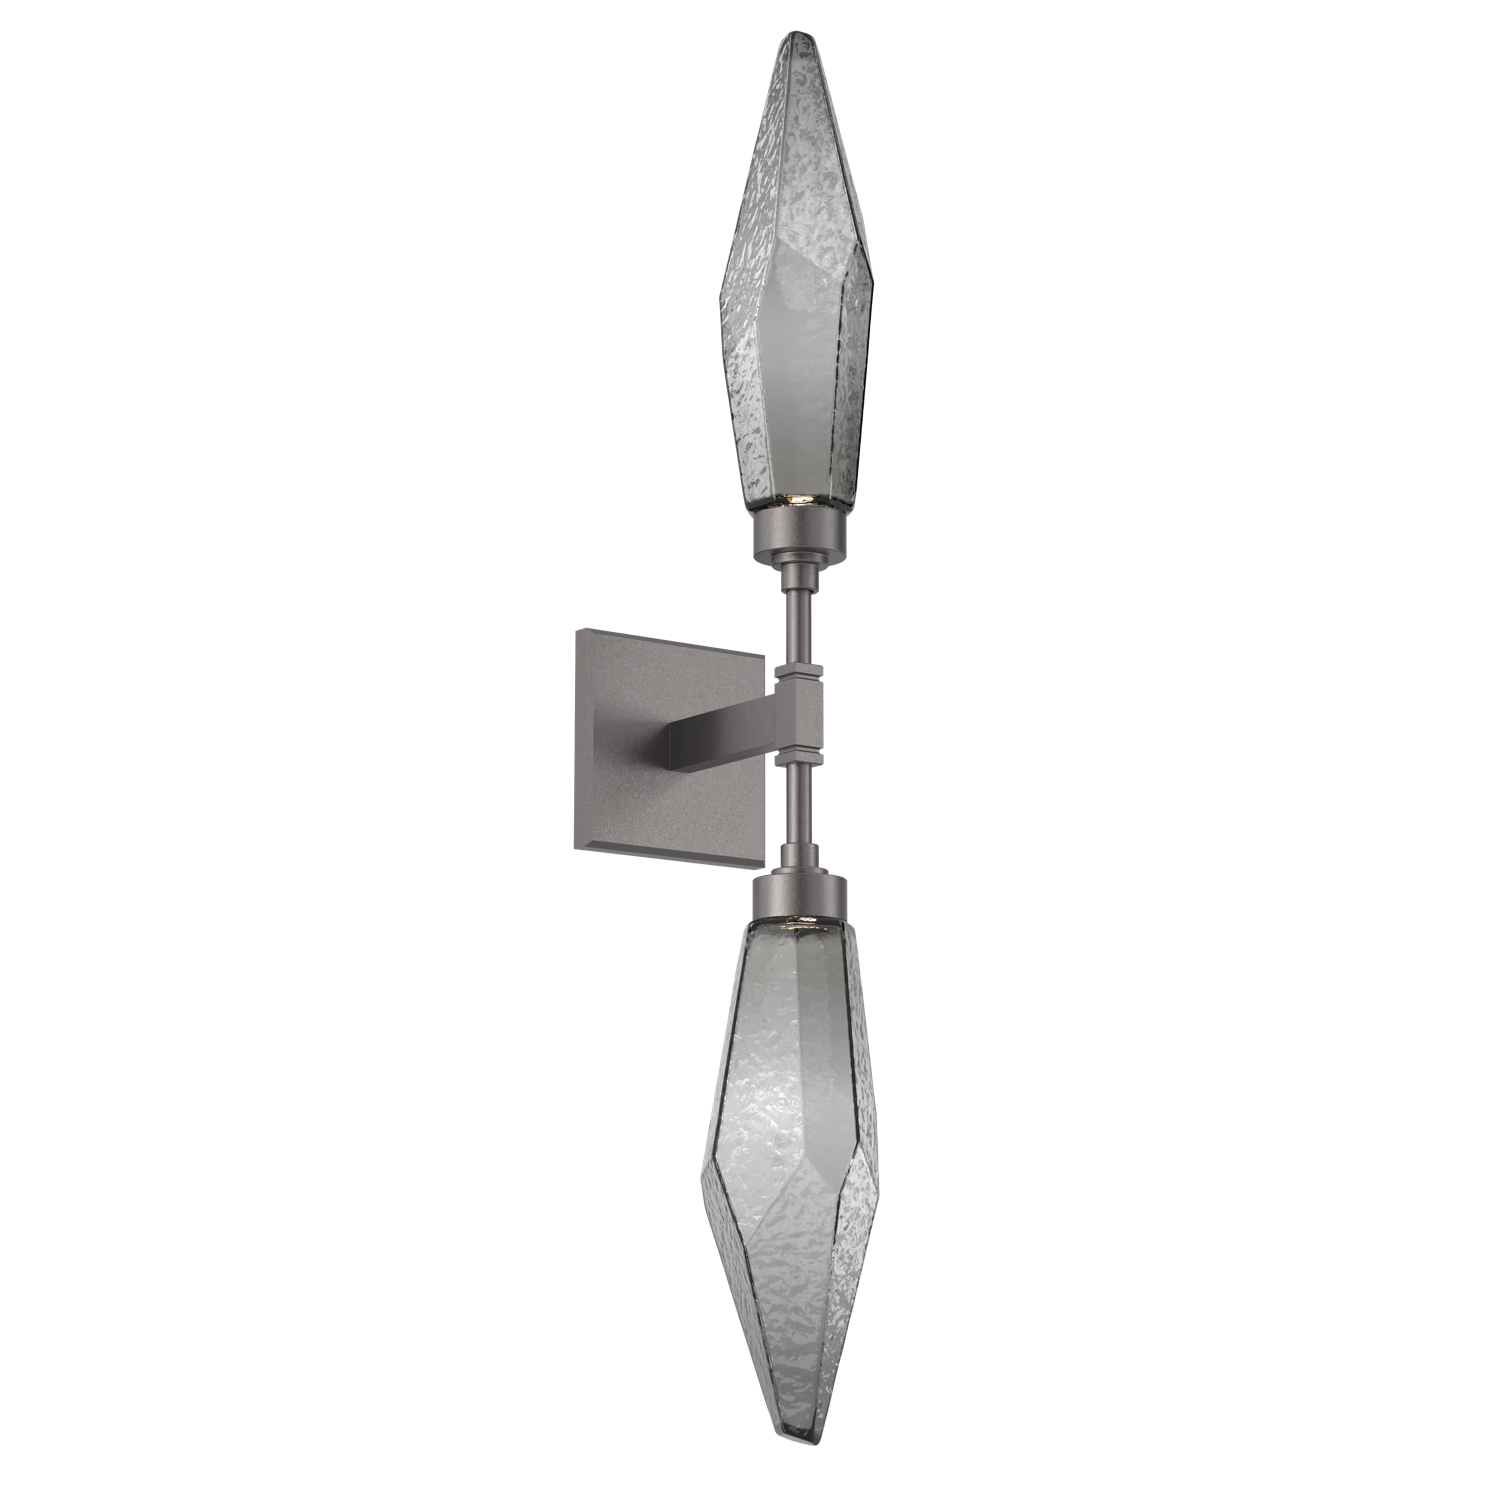 IDB0050-02-GP-CS-Hammerton-Studio-Rock-Crystal-wall-sconce-with-graphite-finish-and-chilled-smoke-glass-shades-and-LED-lamping